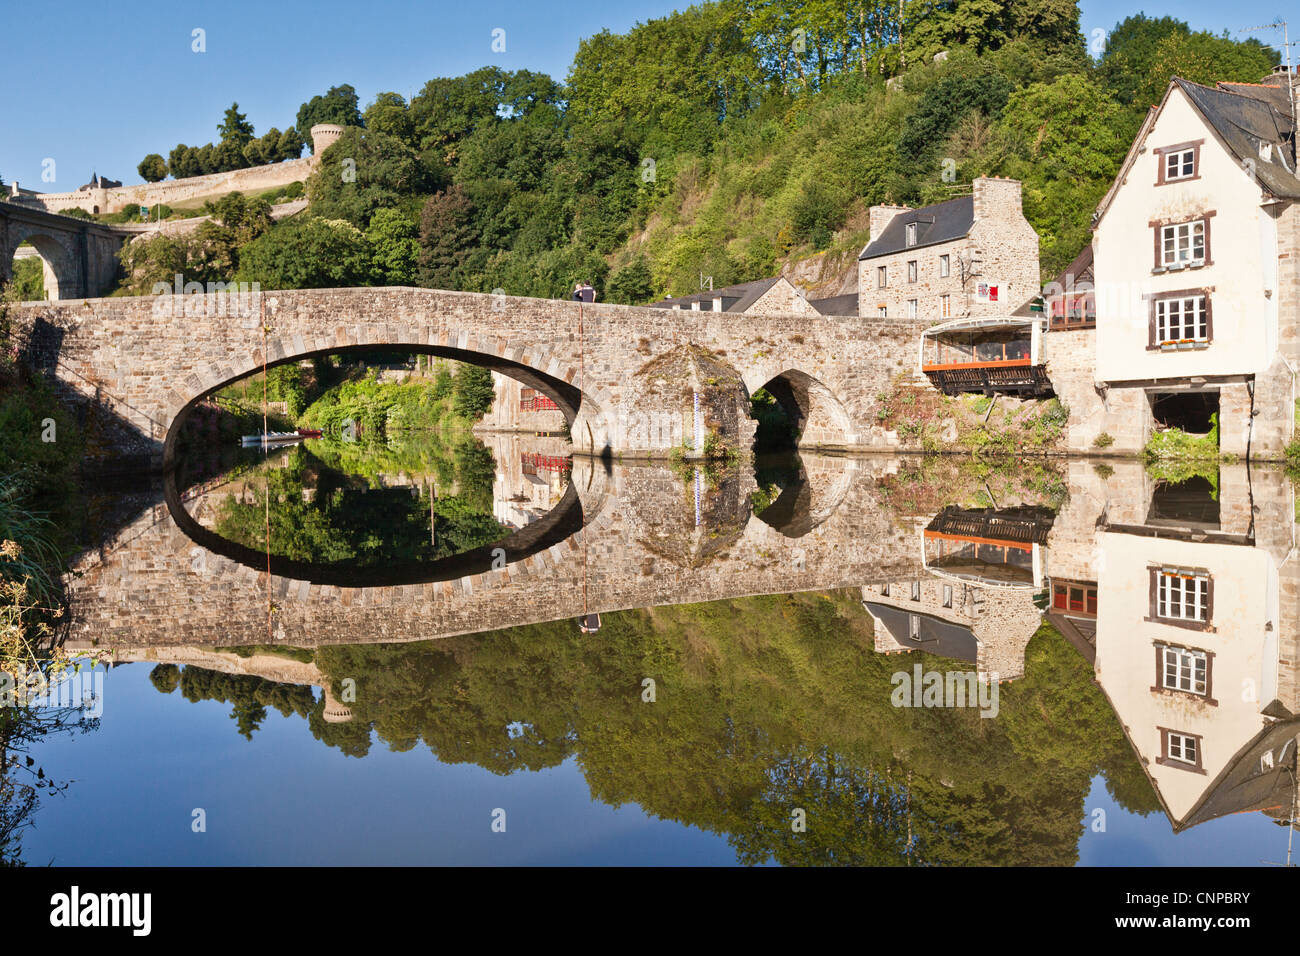 The old port of Dinan on the Rance River in Brittany, France with the main road bridge and city walls in the background. Stock Photo